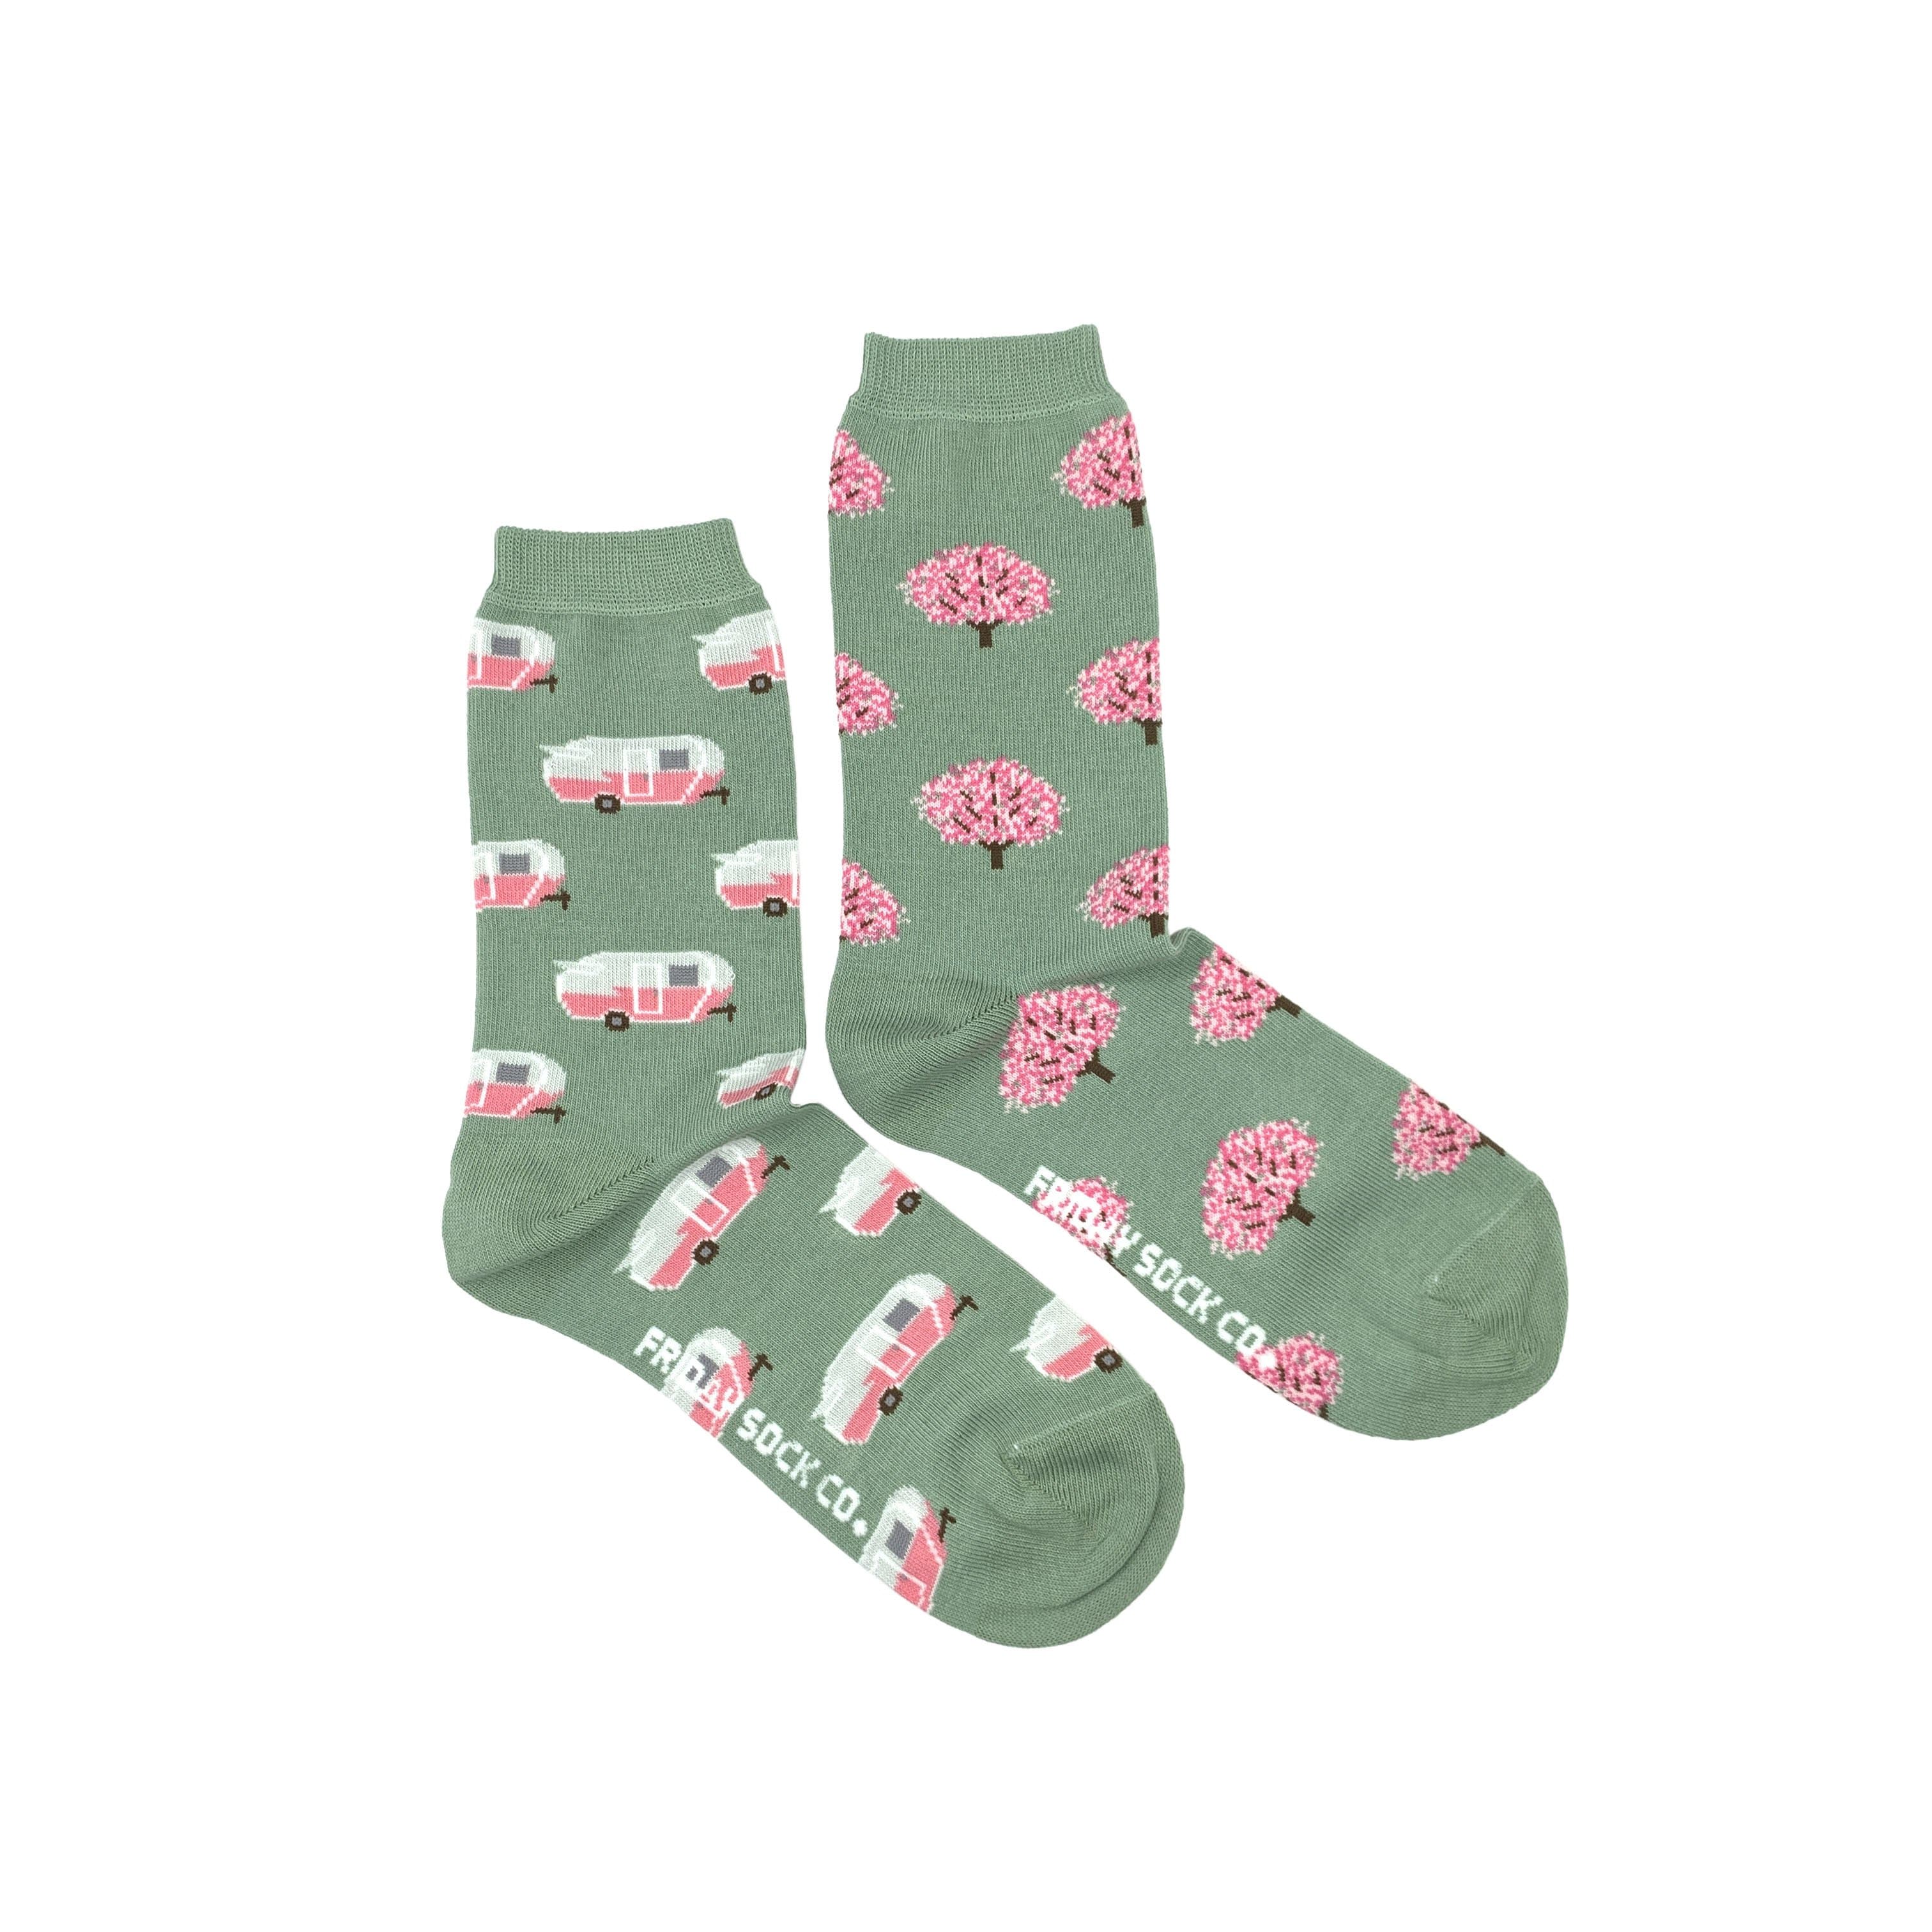 Women's RV & Tree Socks | Mismatched by Design | Friday Sock Co.